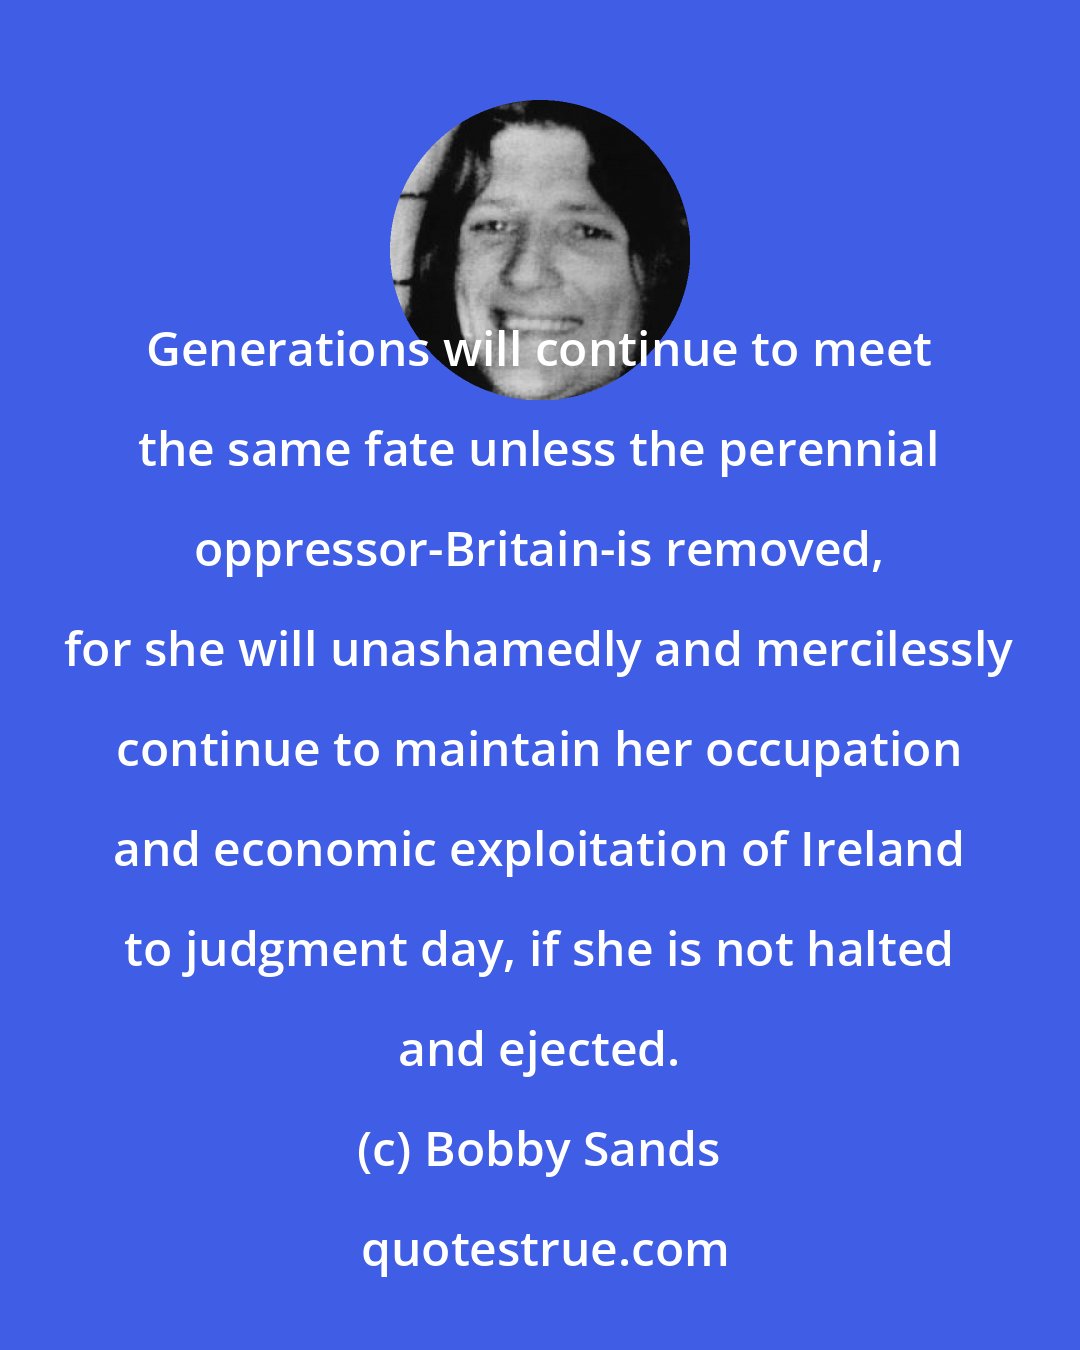 Bobby Sands: Generations will continue to meet the same fate unless the perennial oppressor-Britain-is removed, for she will unashamedly and mercilessly continue to maintain her occupation and economic exploitation of Ireland to judgment day, if she is not halted and ejected.